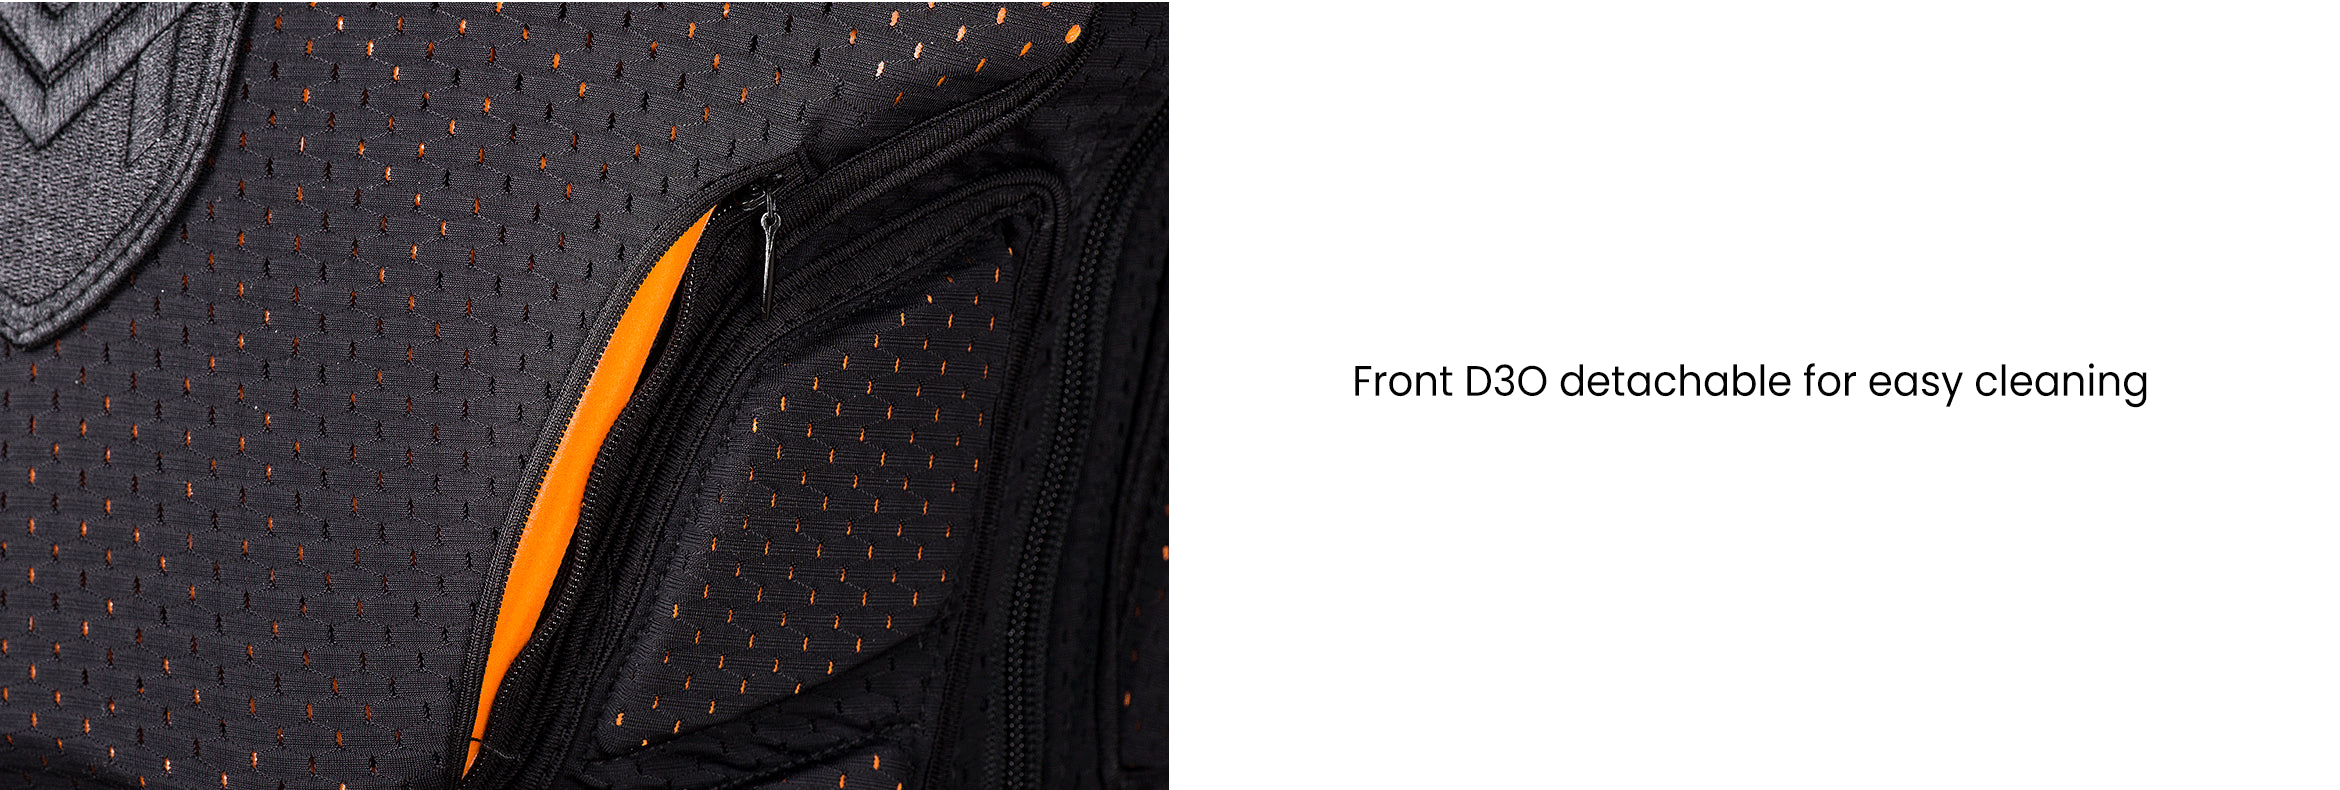 4. Doorek ski gear - Front D3O detachable for easy cleaning